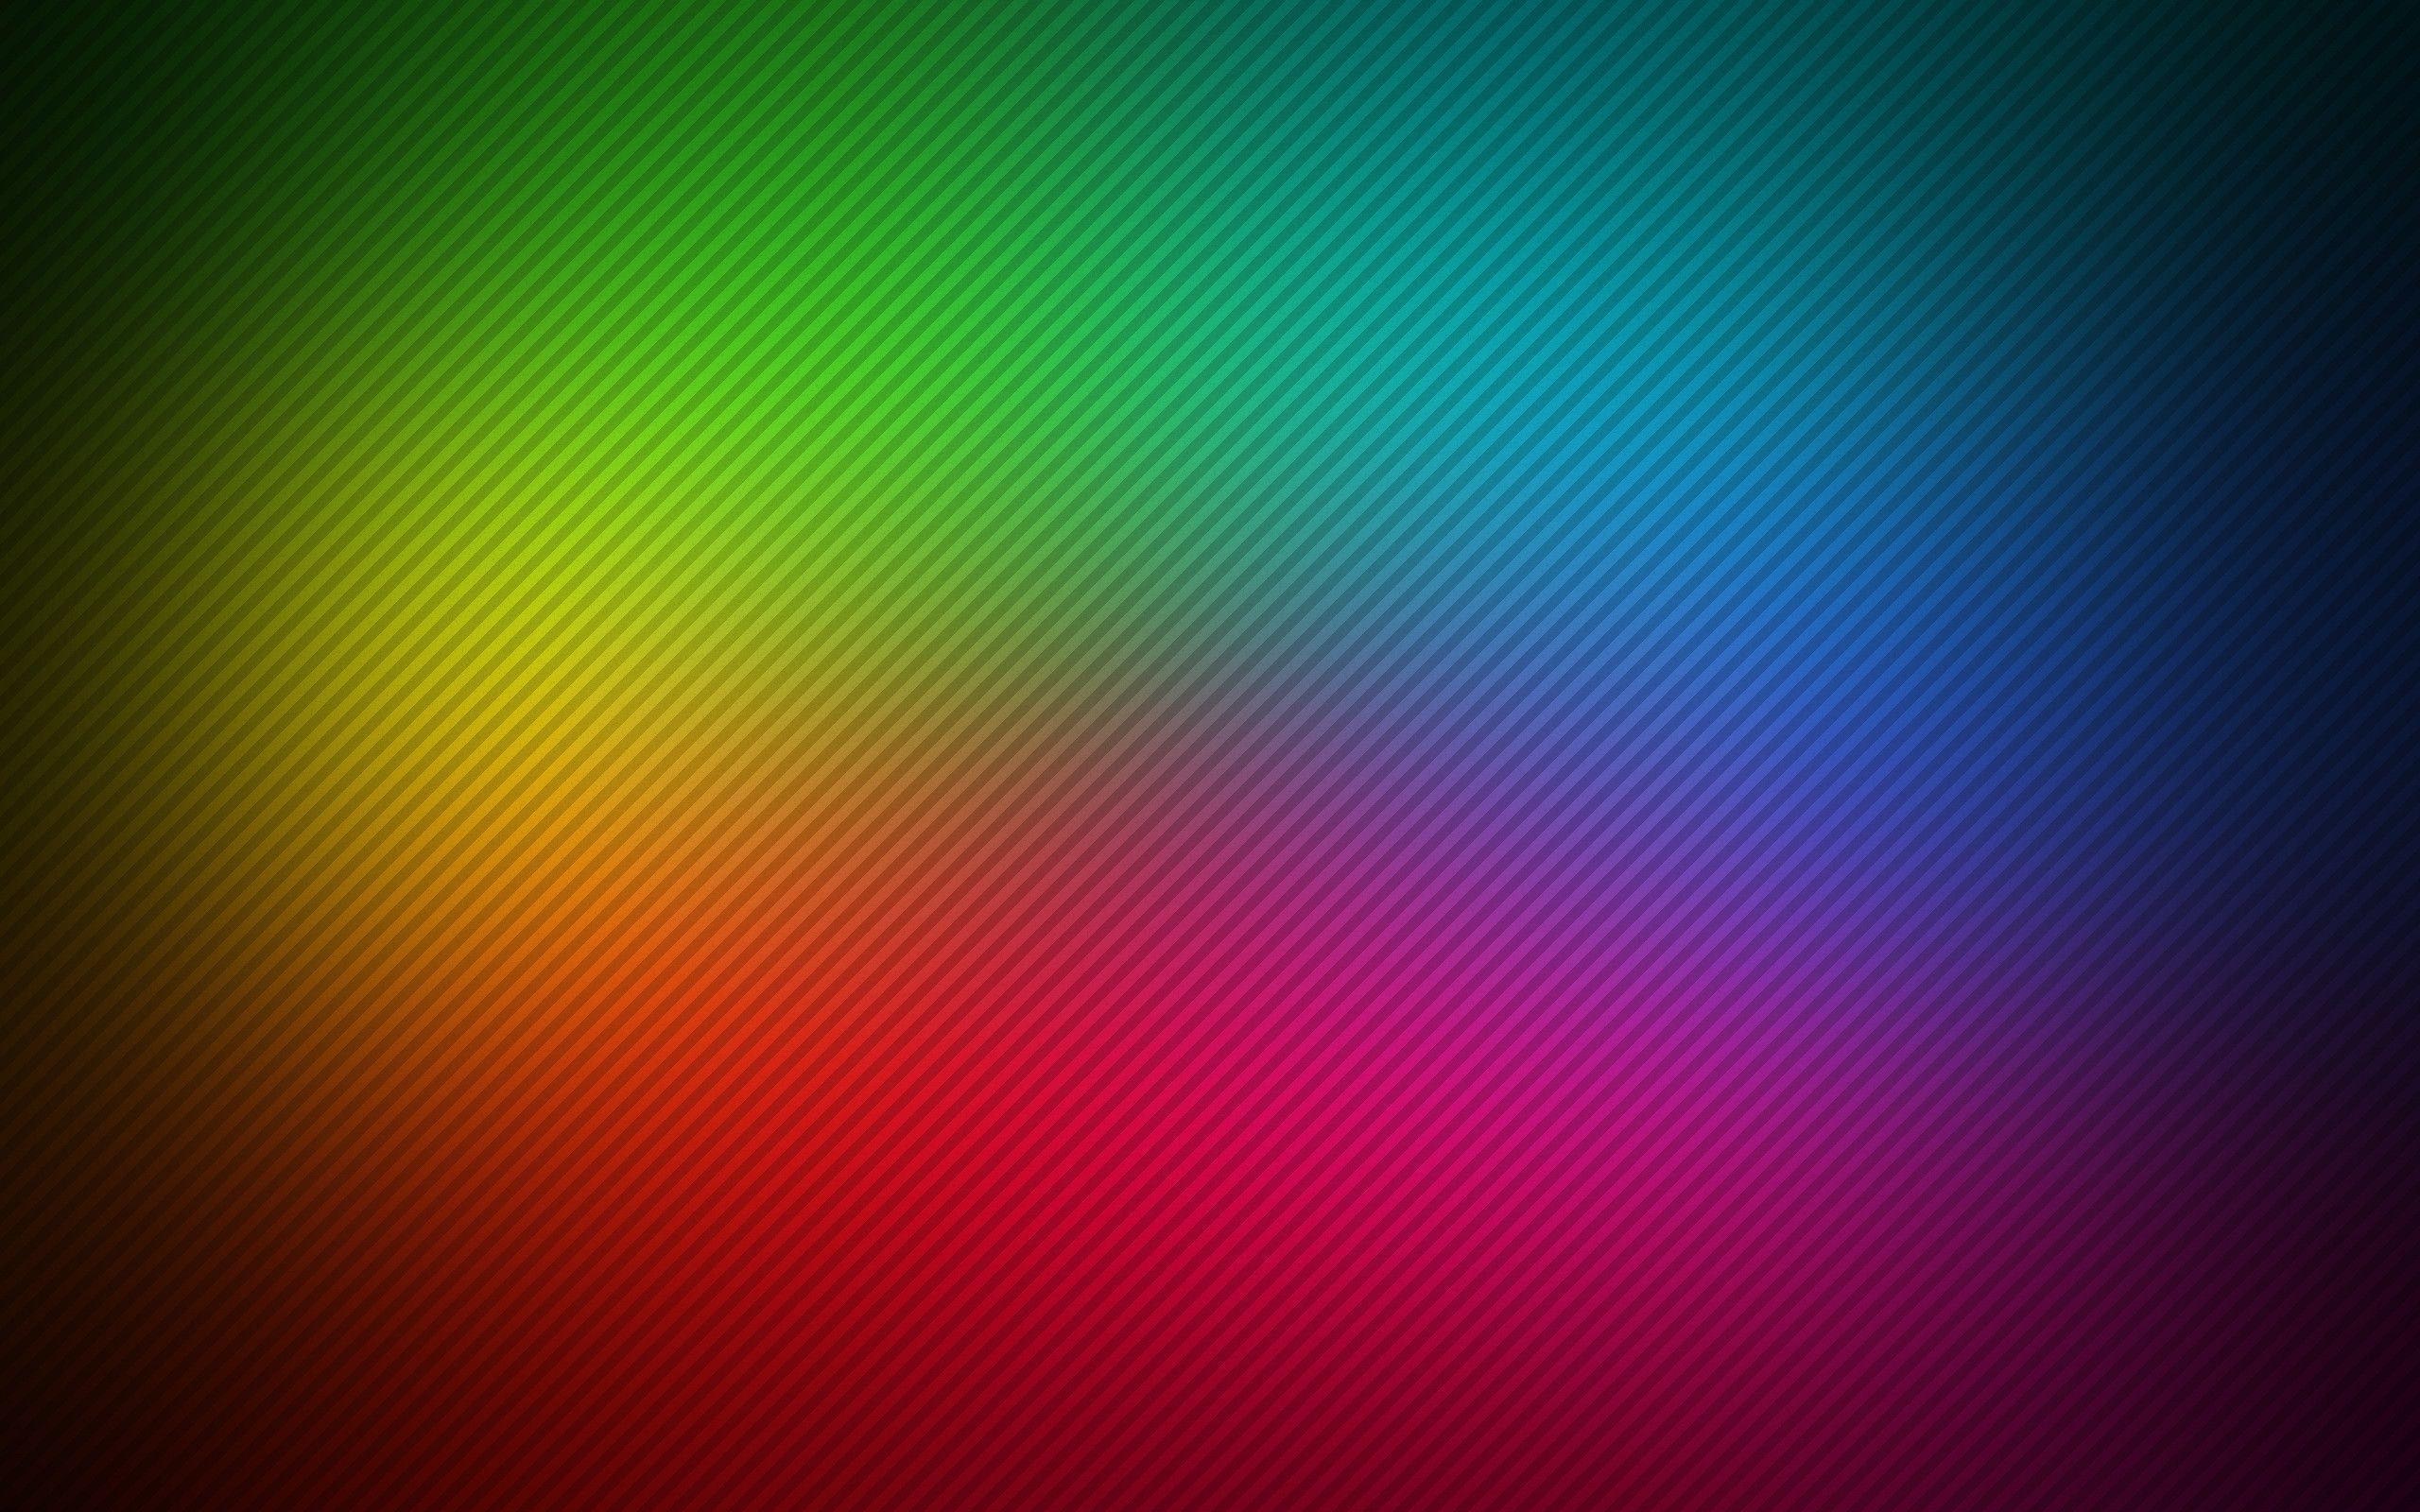 Bright Colorful Desktop Background Image & Picture